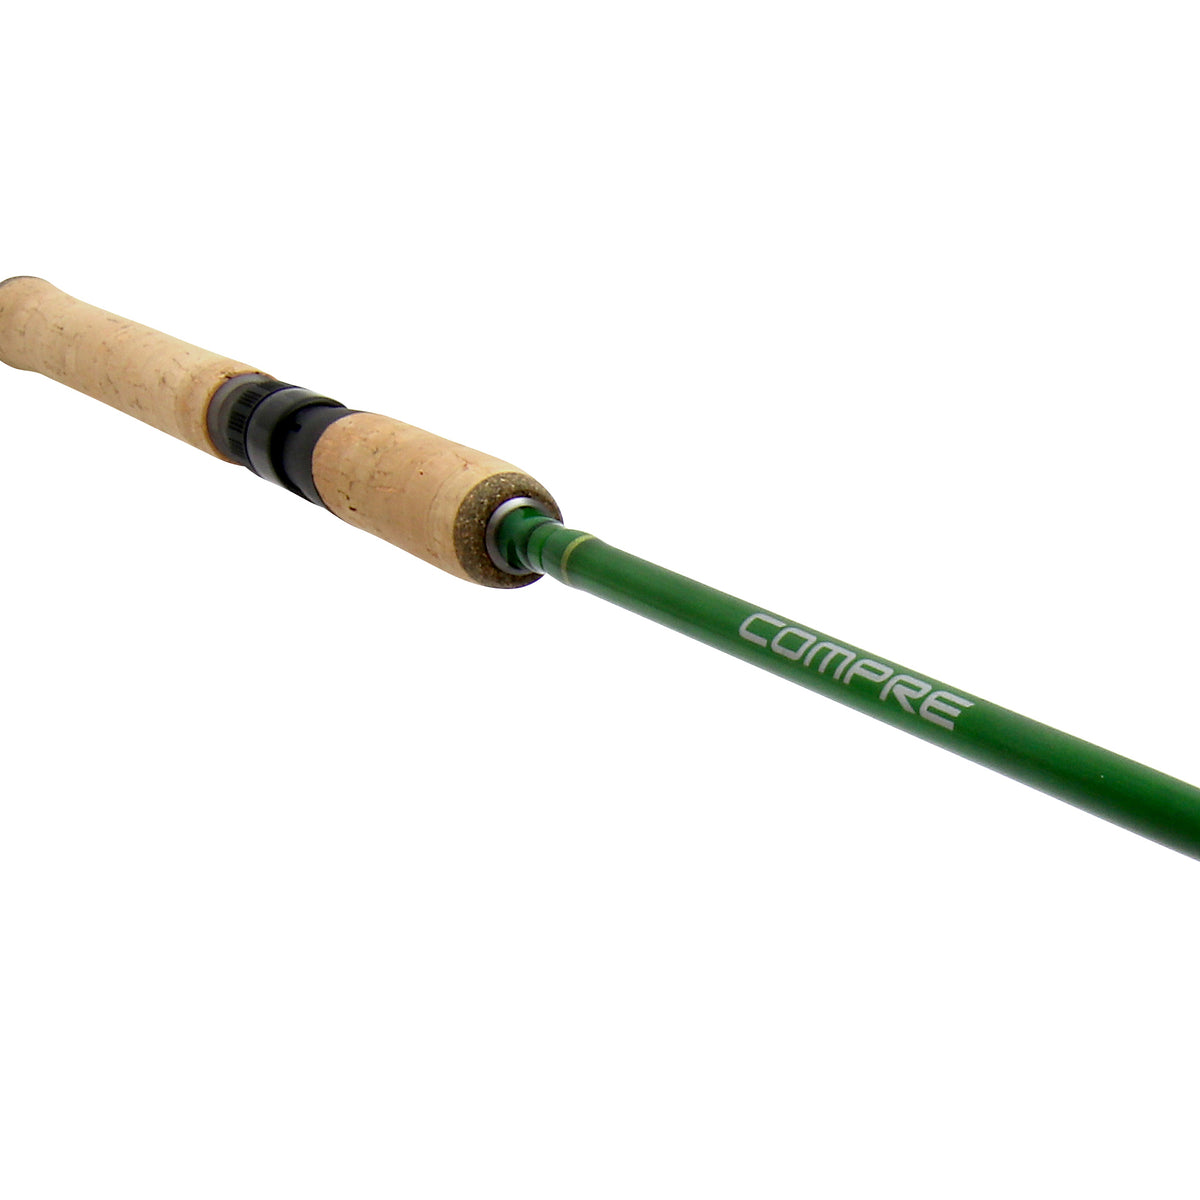 Shimano Compre Walleye Spinning Rod CPSWX66MLD